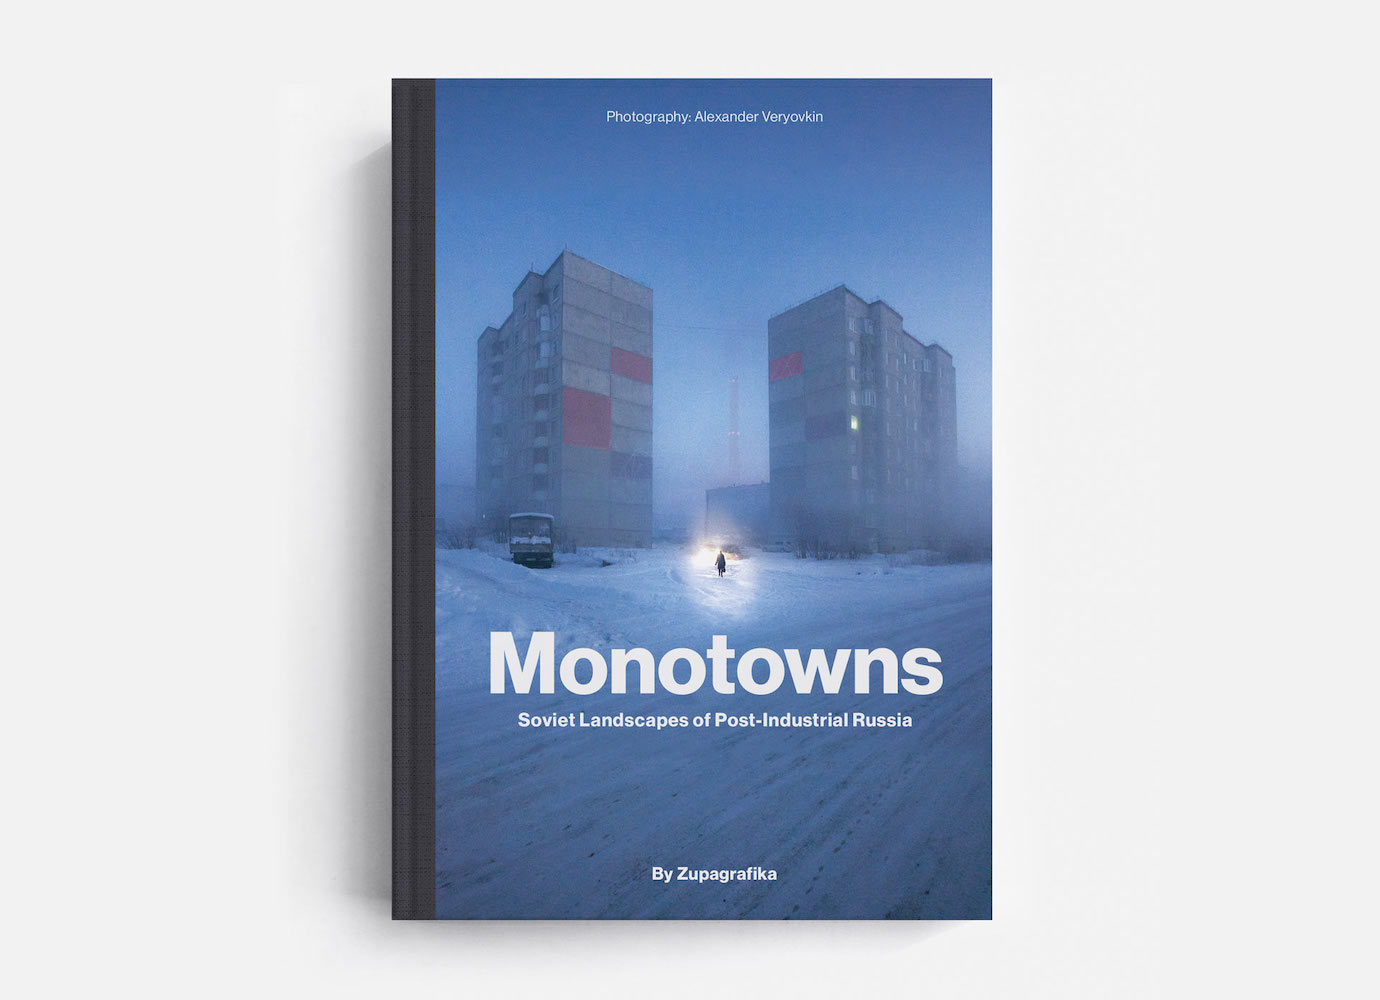 Monotowns: Soviet Landscapes of Post-Industrial Russia by Zupagrafika